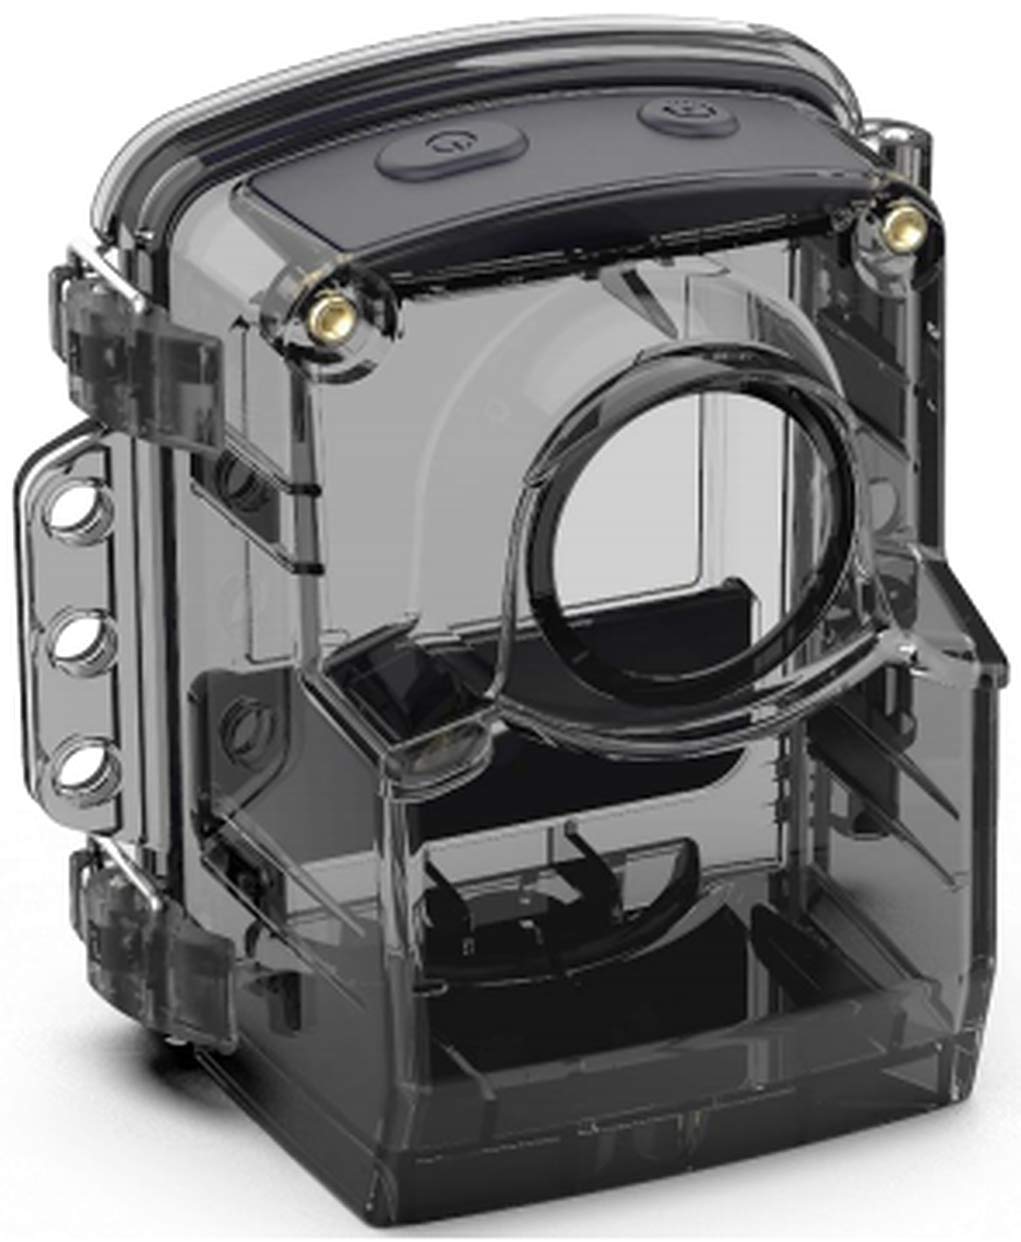  [AUSTRALIA] - Brinno ATH1000 IPX67 Clear Waterproof Housing Camera Case - Ideal for Outdoor Environments, Extreme Action Videos, and Construction Sites - Compatible with TLC2000/TLC2020 Series Single